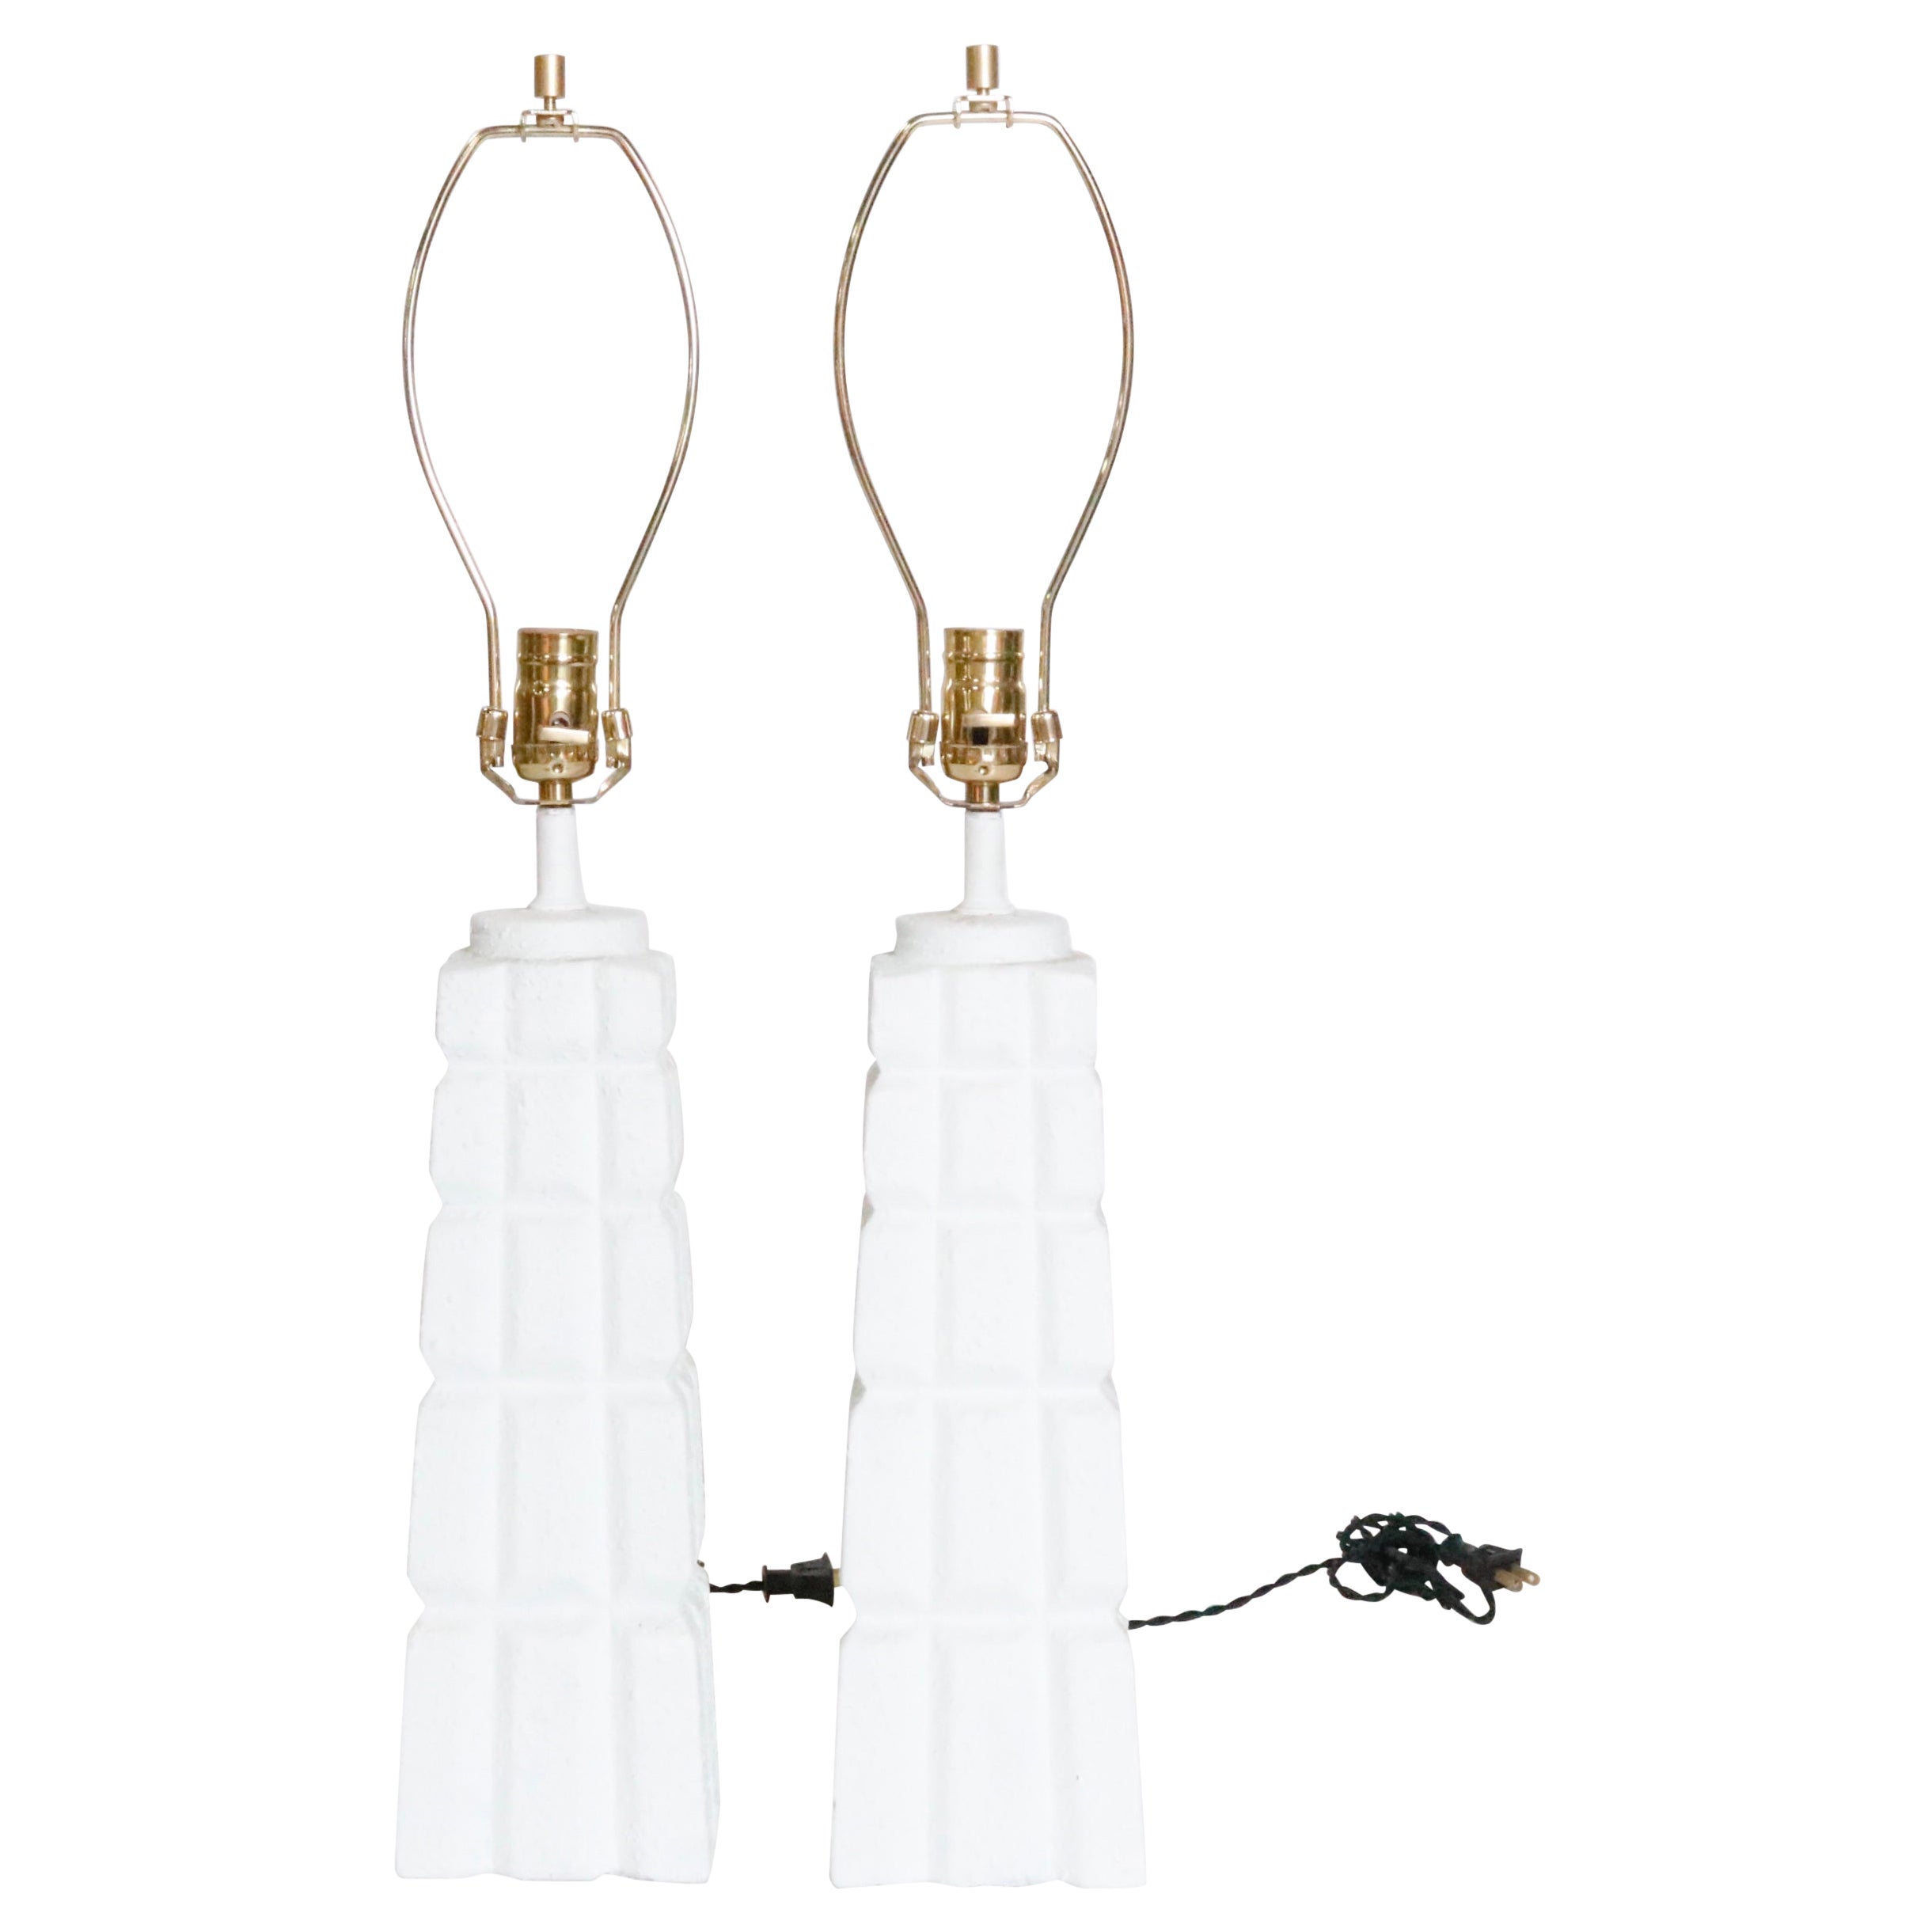 White Gesso Table Lamps, a Pair For Sale